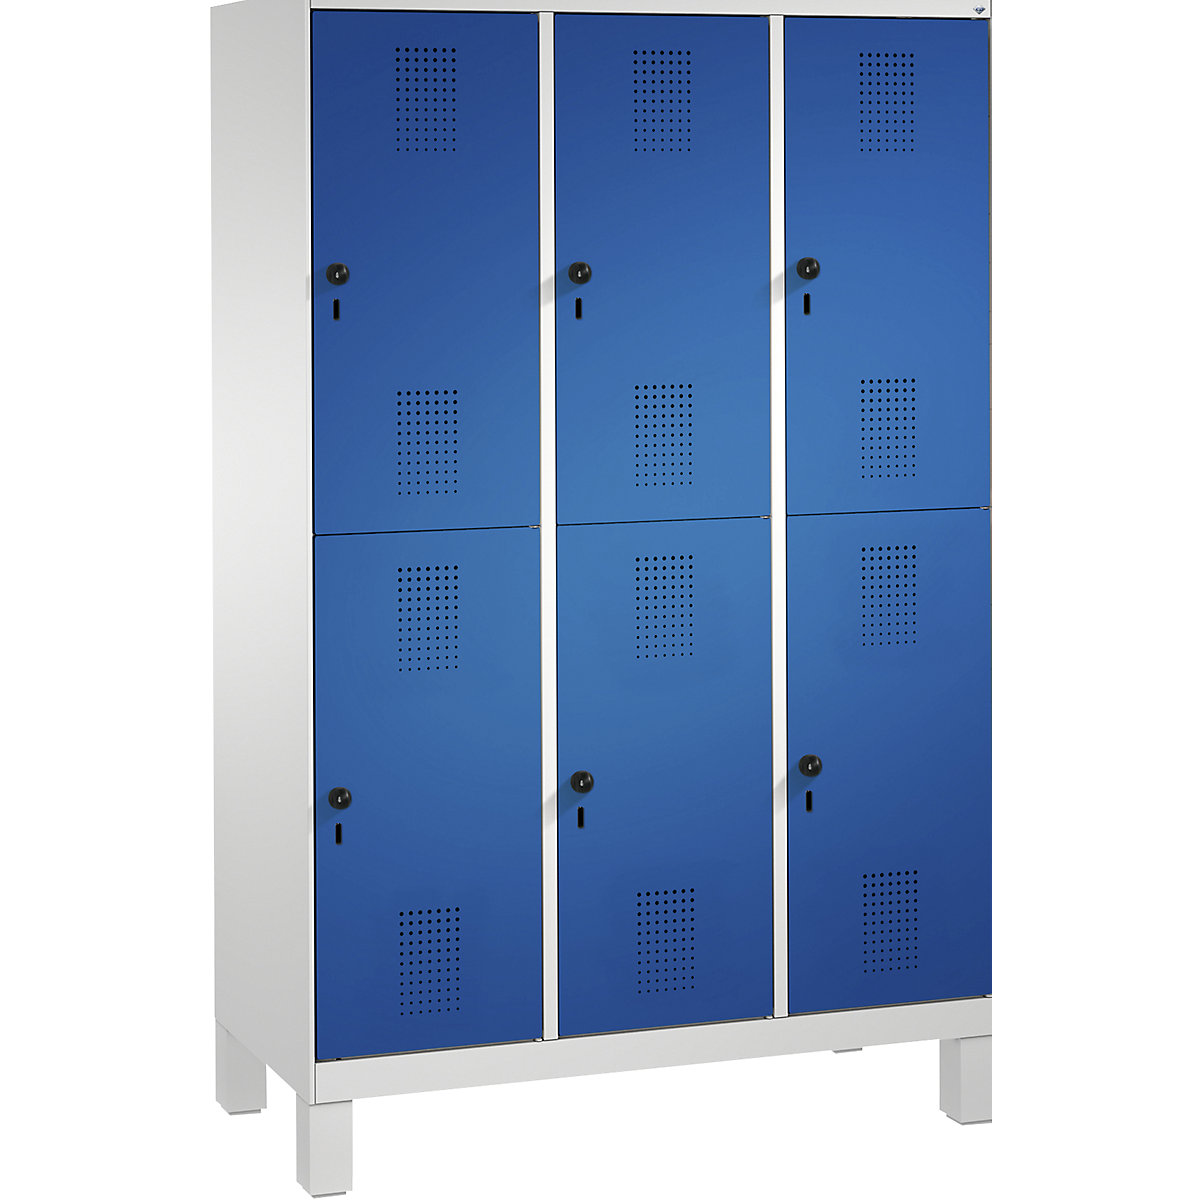 EVOLO cloakroom locker, double tier, with feet – C+P, 3 compartments, 2 shelf compartments each, compartment width 400 mm, light grey / gentian blue-15